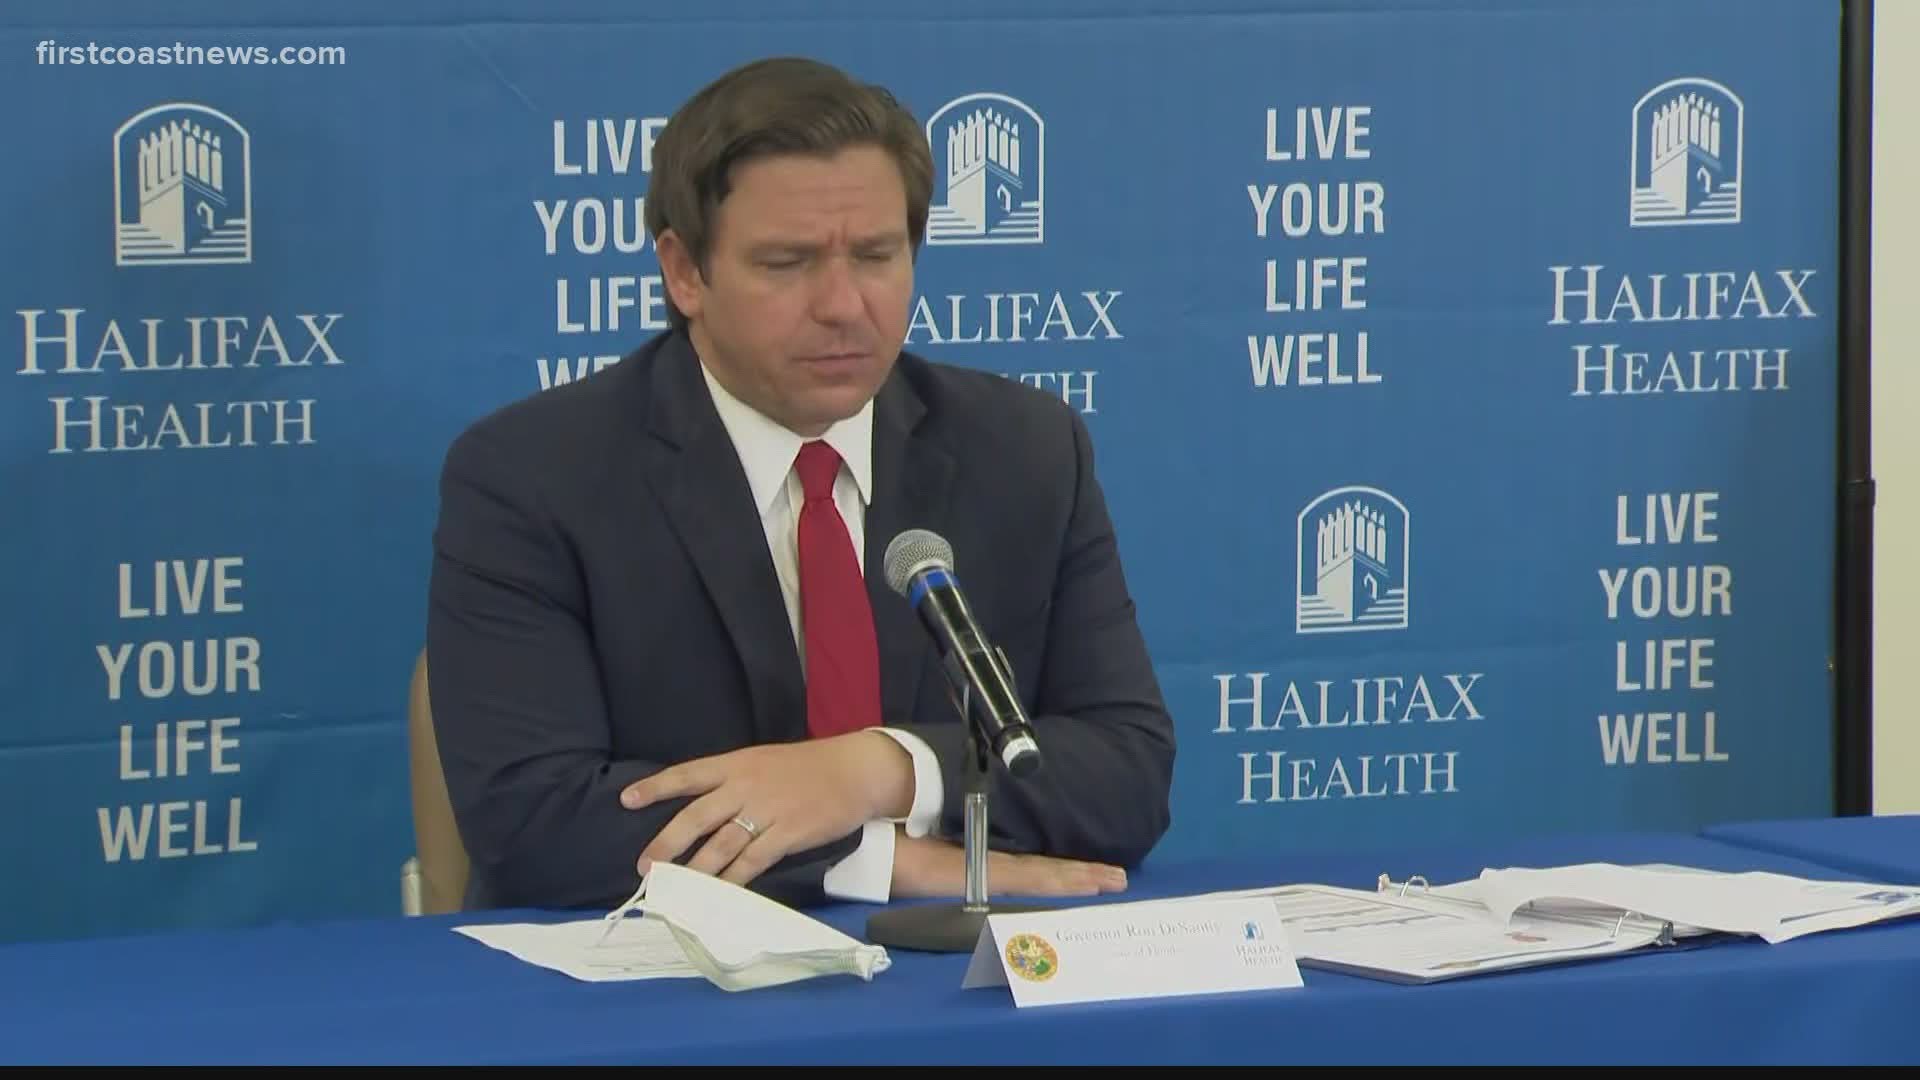 During the news conference, DeSantis said the state received 200,000 COVID-19 anti-body tests early Sunday morning.